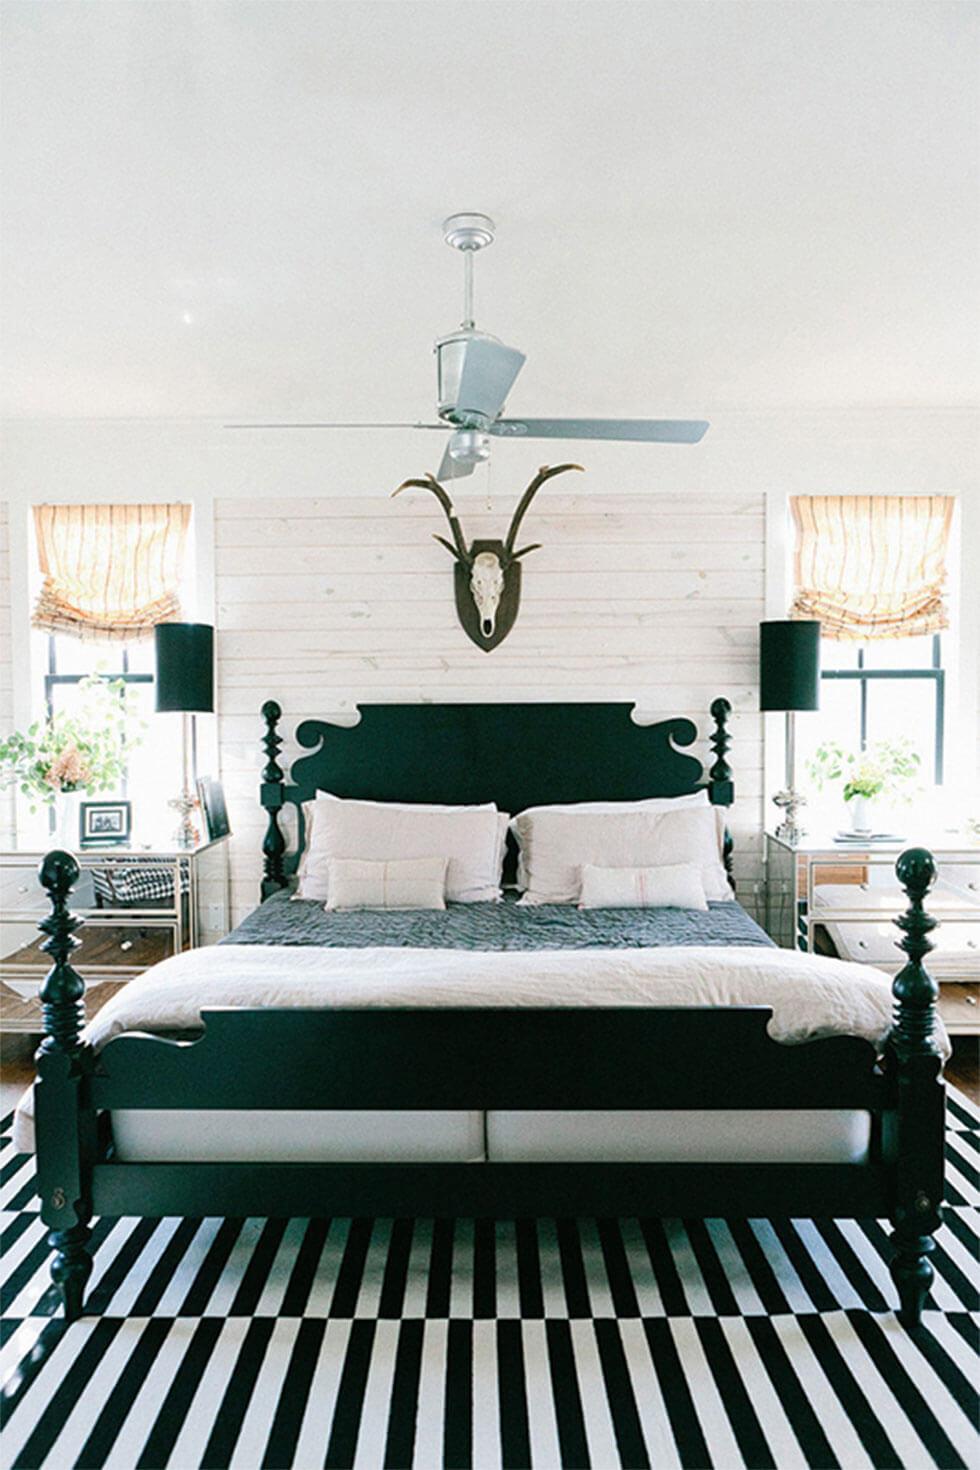 Classic black wooden bed in a white brick room with black lamps and modern, printed rug